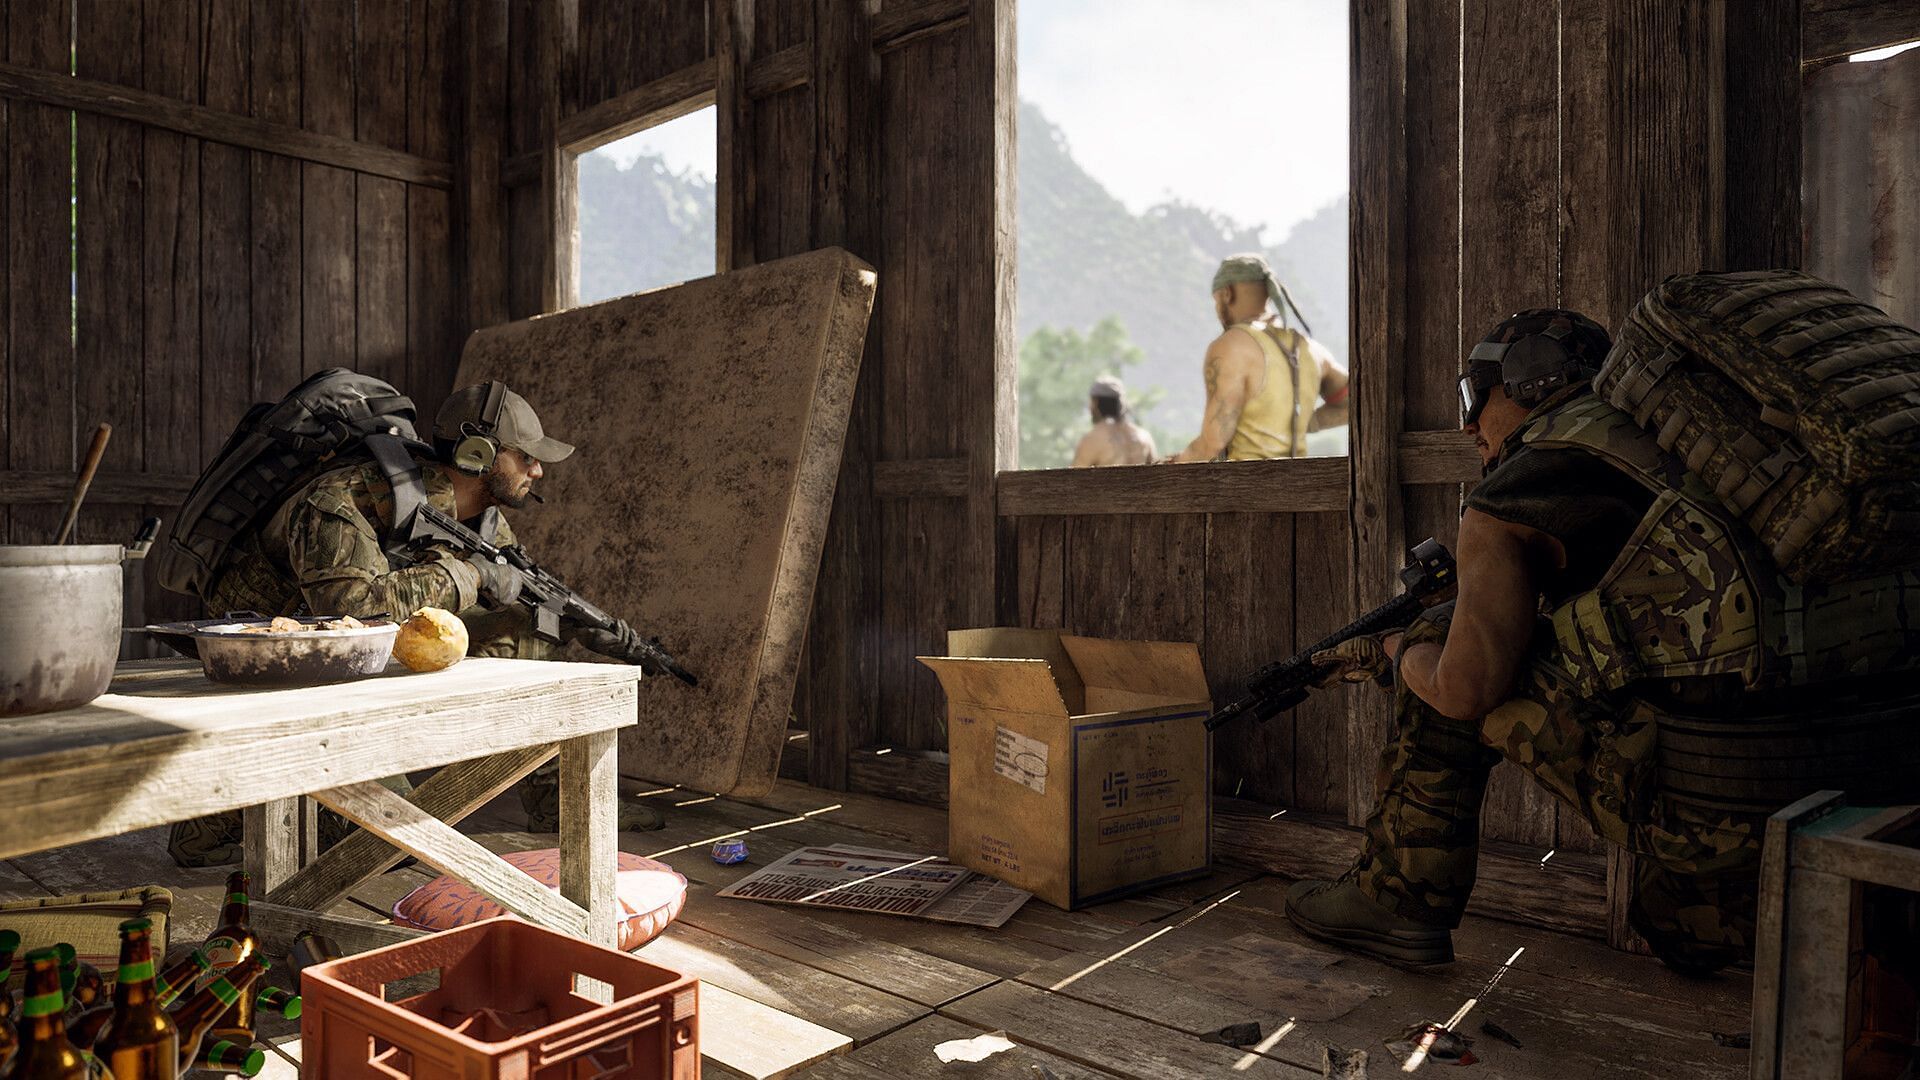 Two Operators taking cover in a shed in Gray Zone Warfare